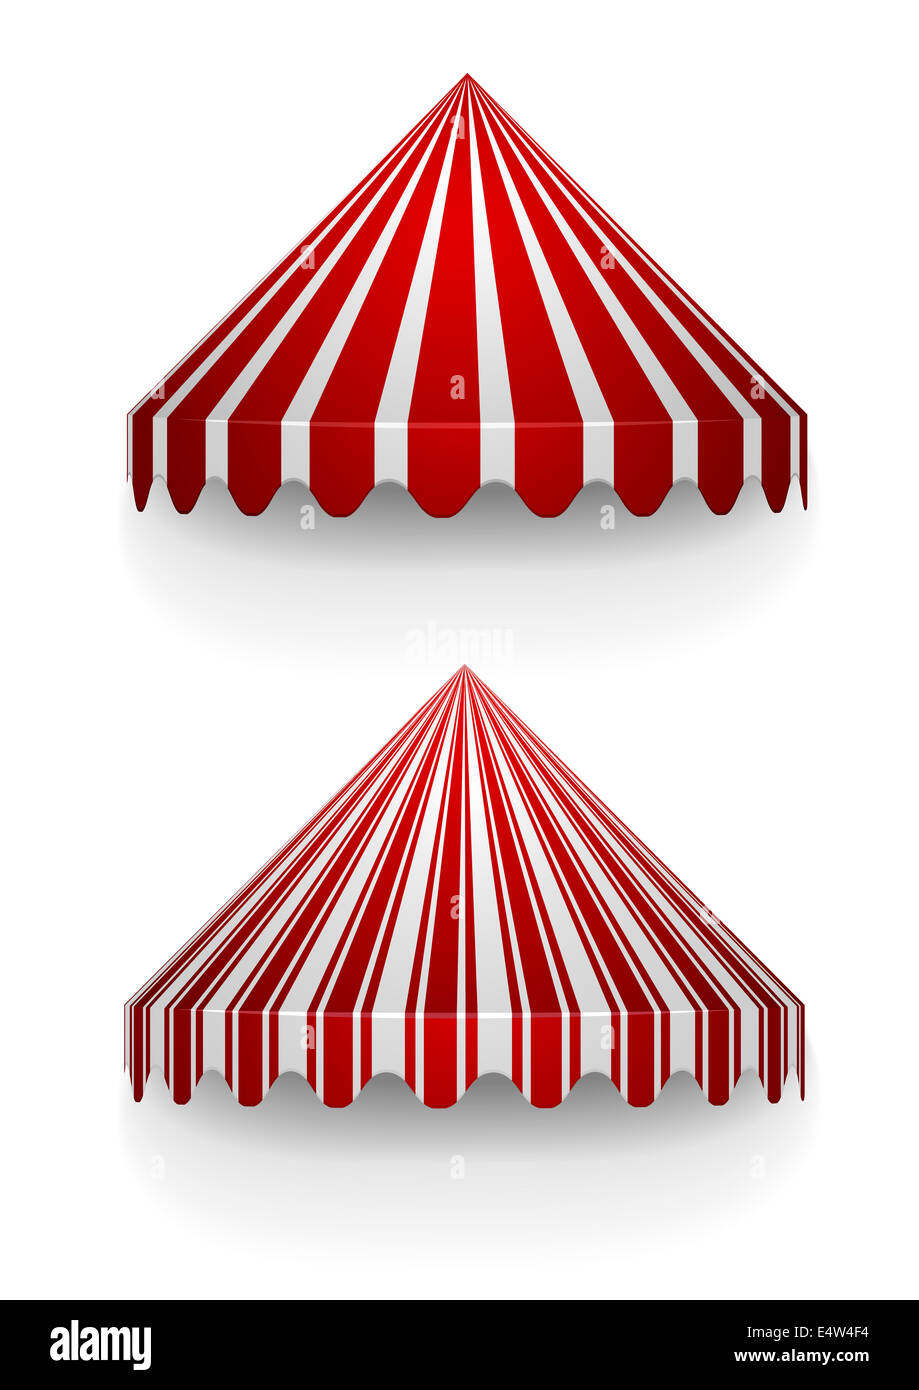 conical awnings Stock Photo